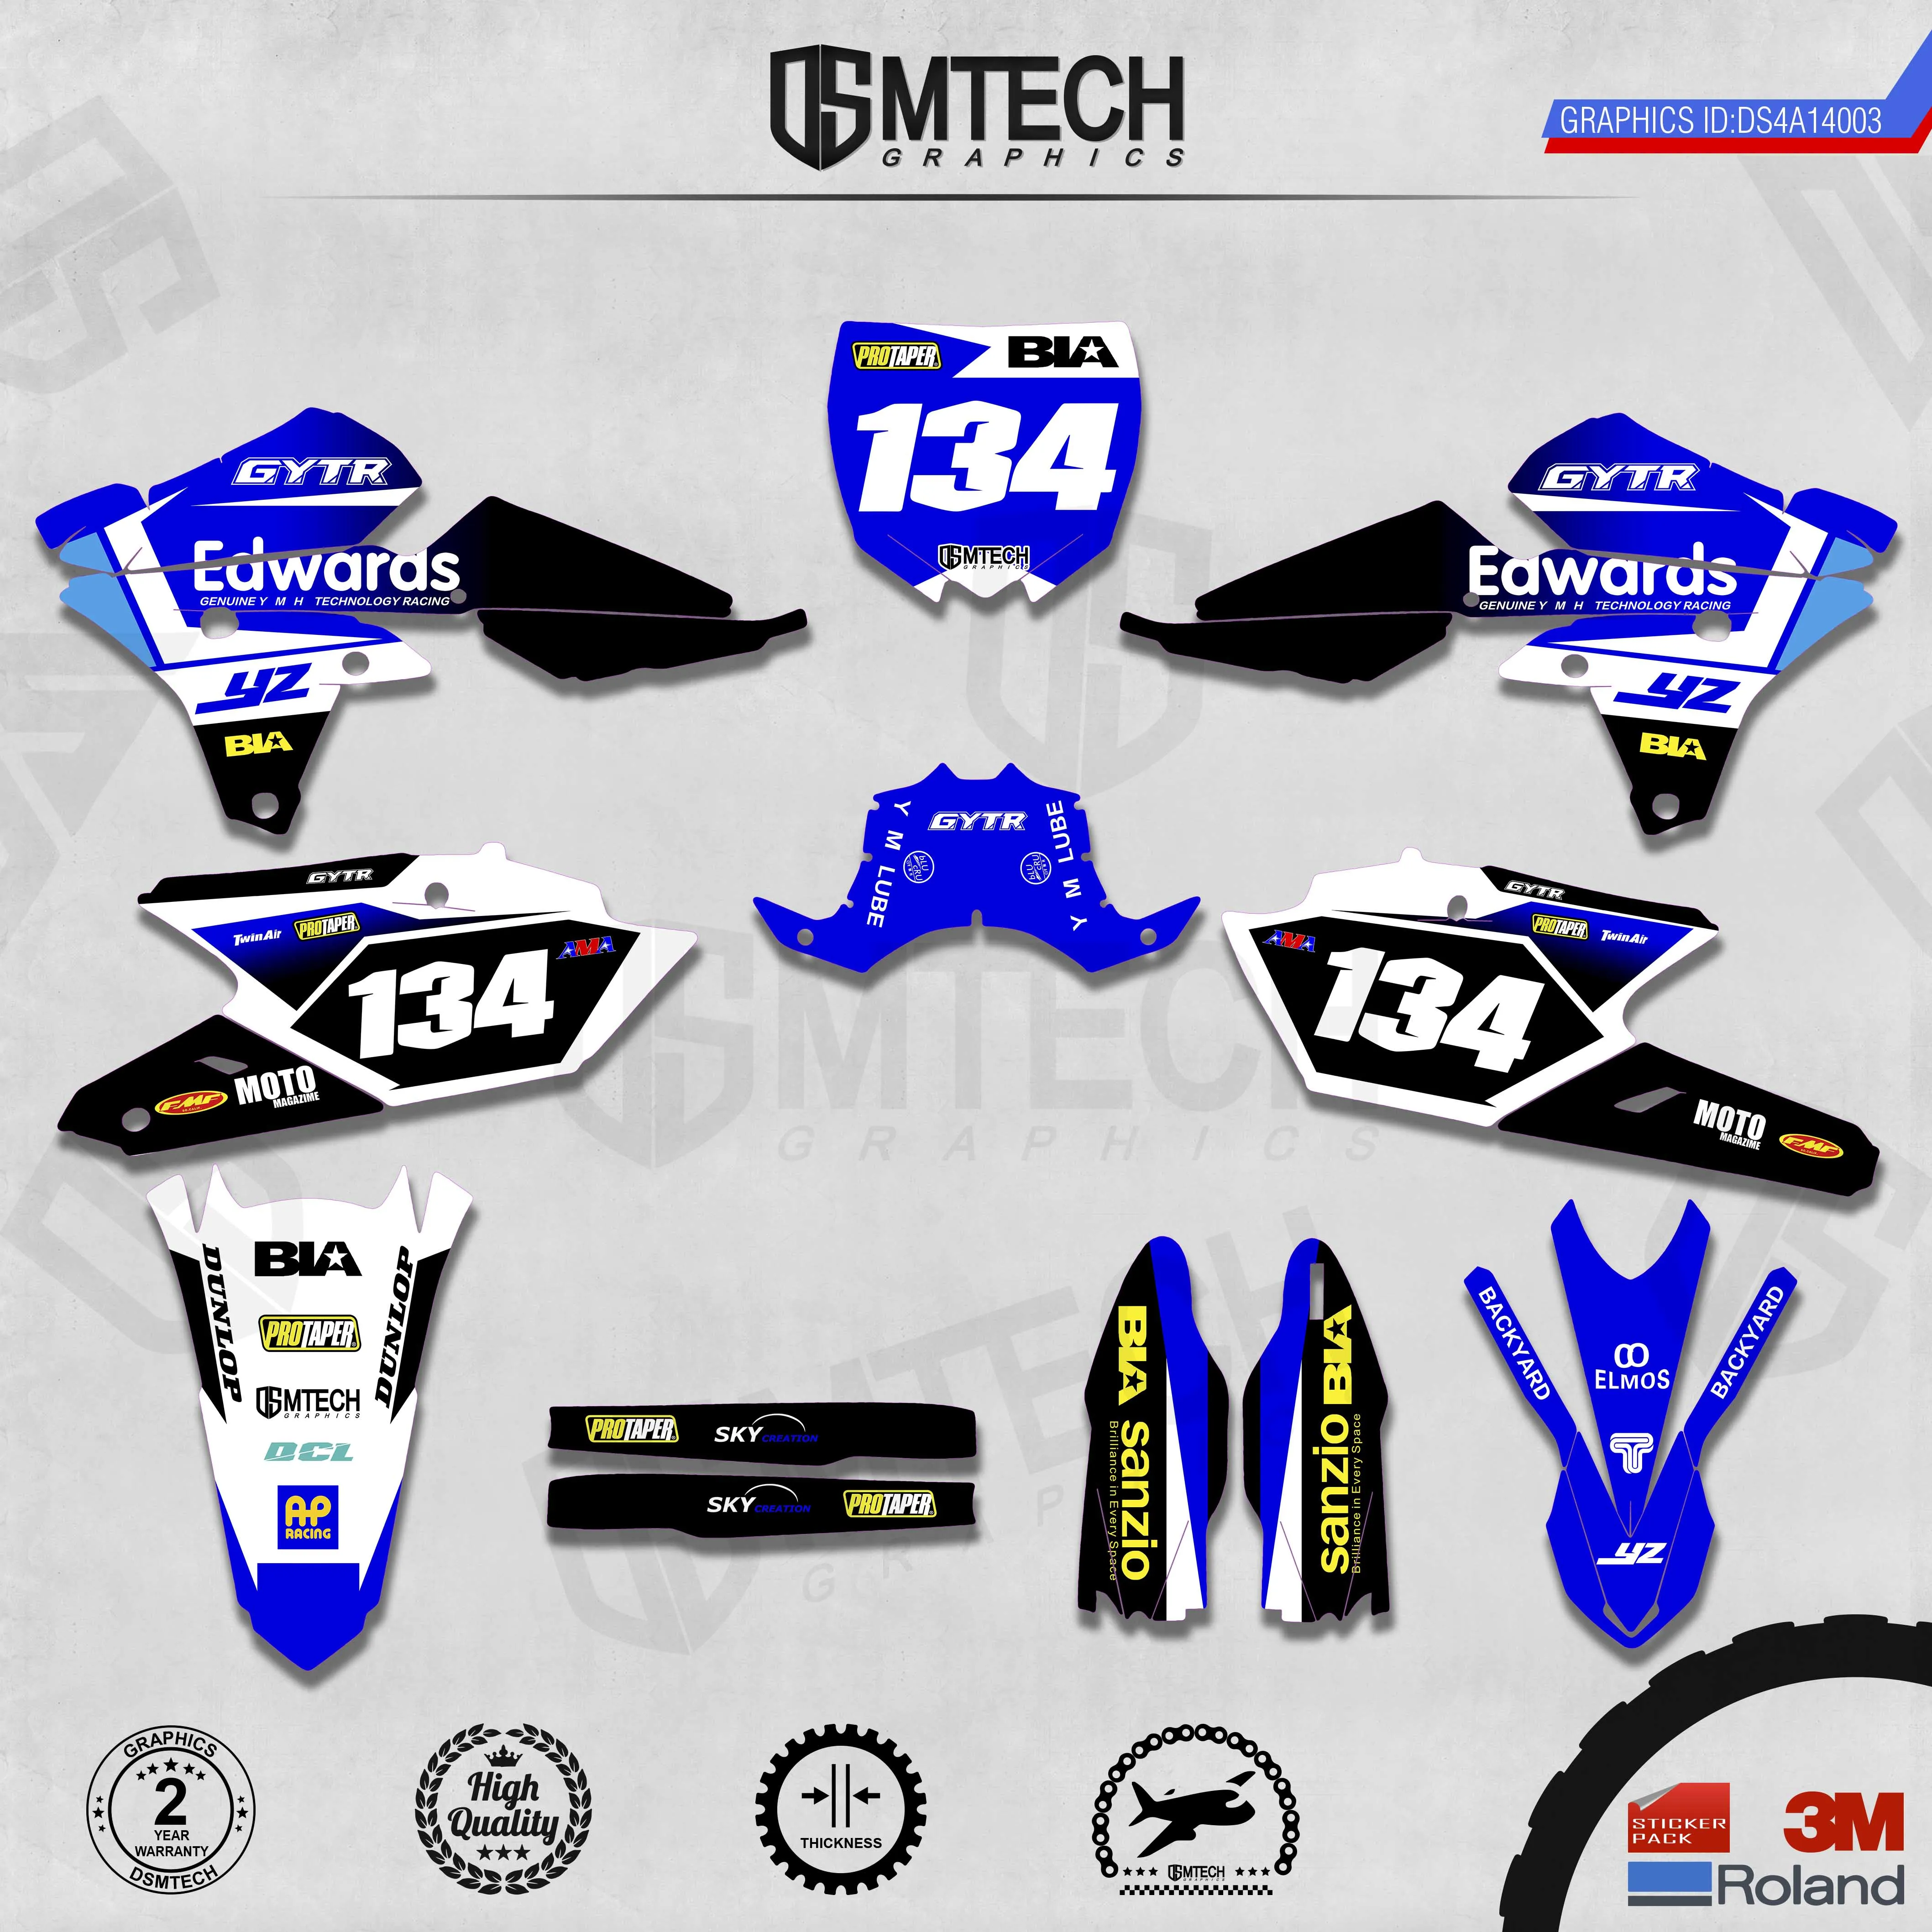 DSMTECH Customized Team Graphics  Backgrounds Decals 3M Custom Stickers For 14-18 YZ250F 15-19 YZ250FX WRF250 14-17 YZ450F  003